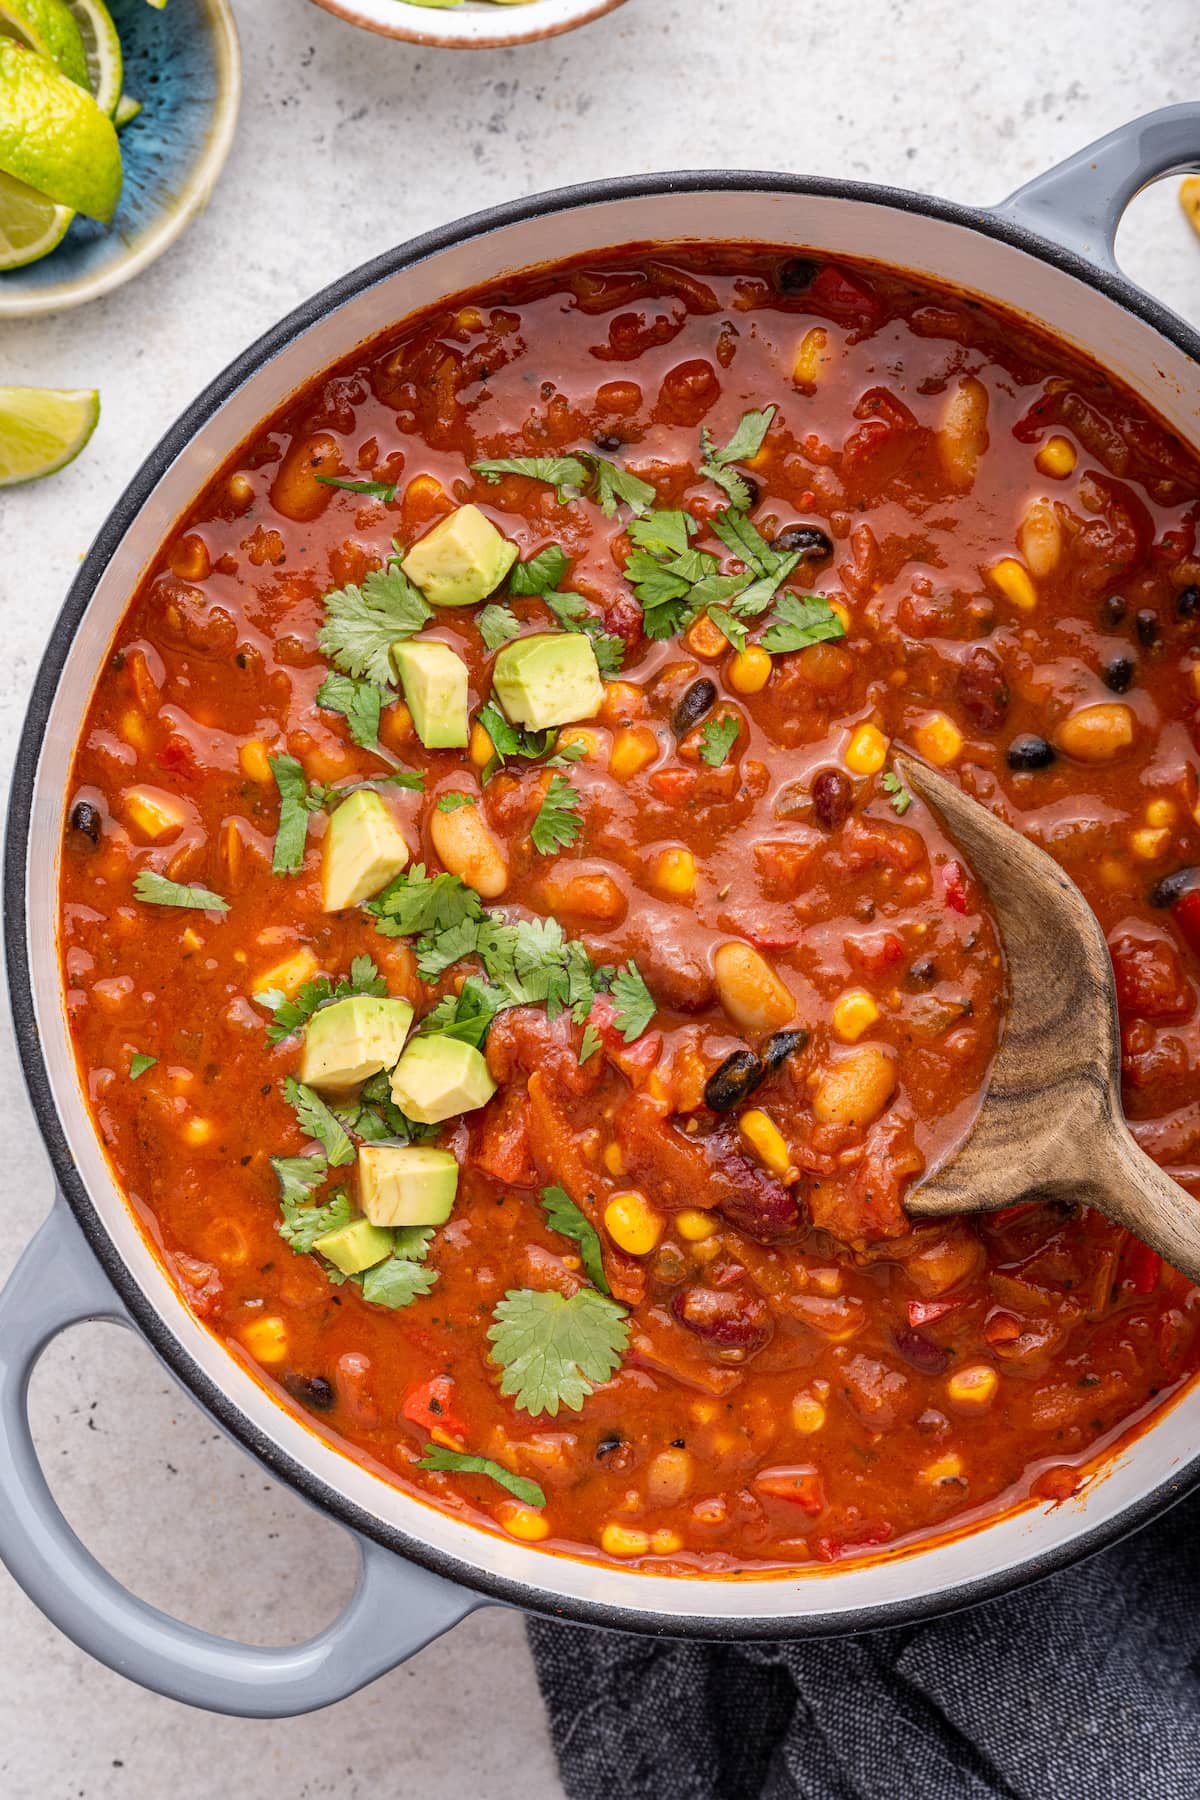 Vegetarian chili in a large pot with a wooden spoon.